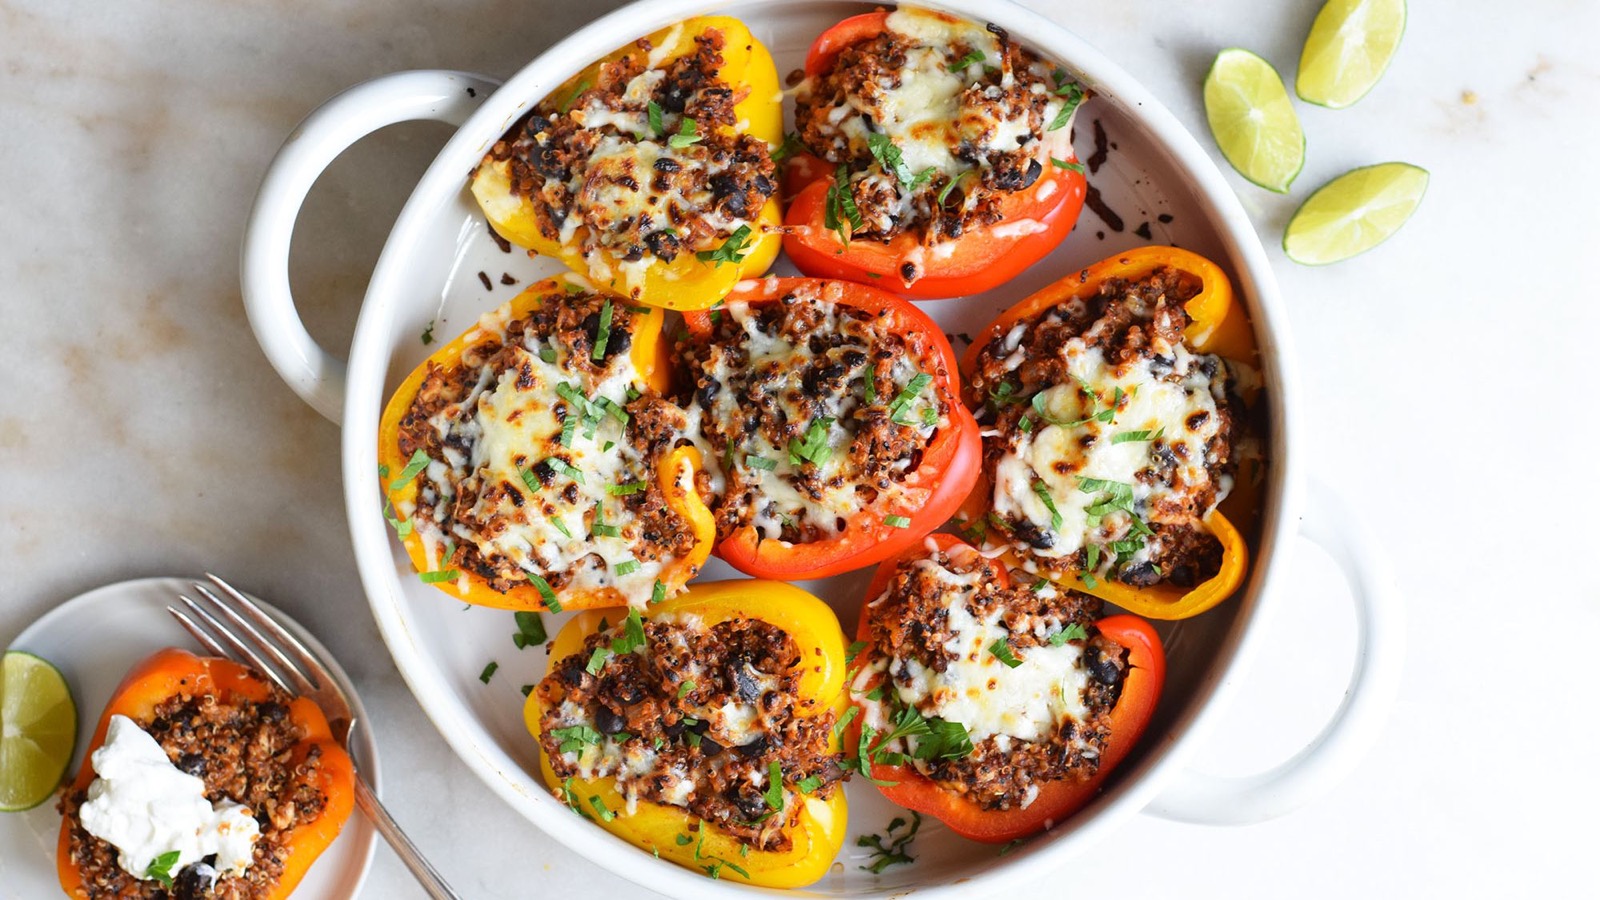 Can We Accurately Guess Your Age Based on How You Rate These Old-School Dishes? Stuffed Peppers